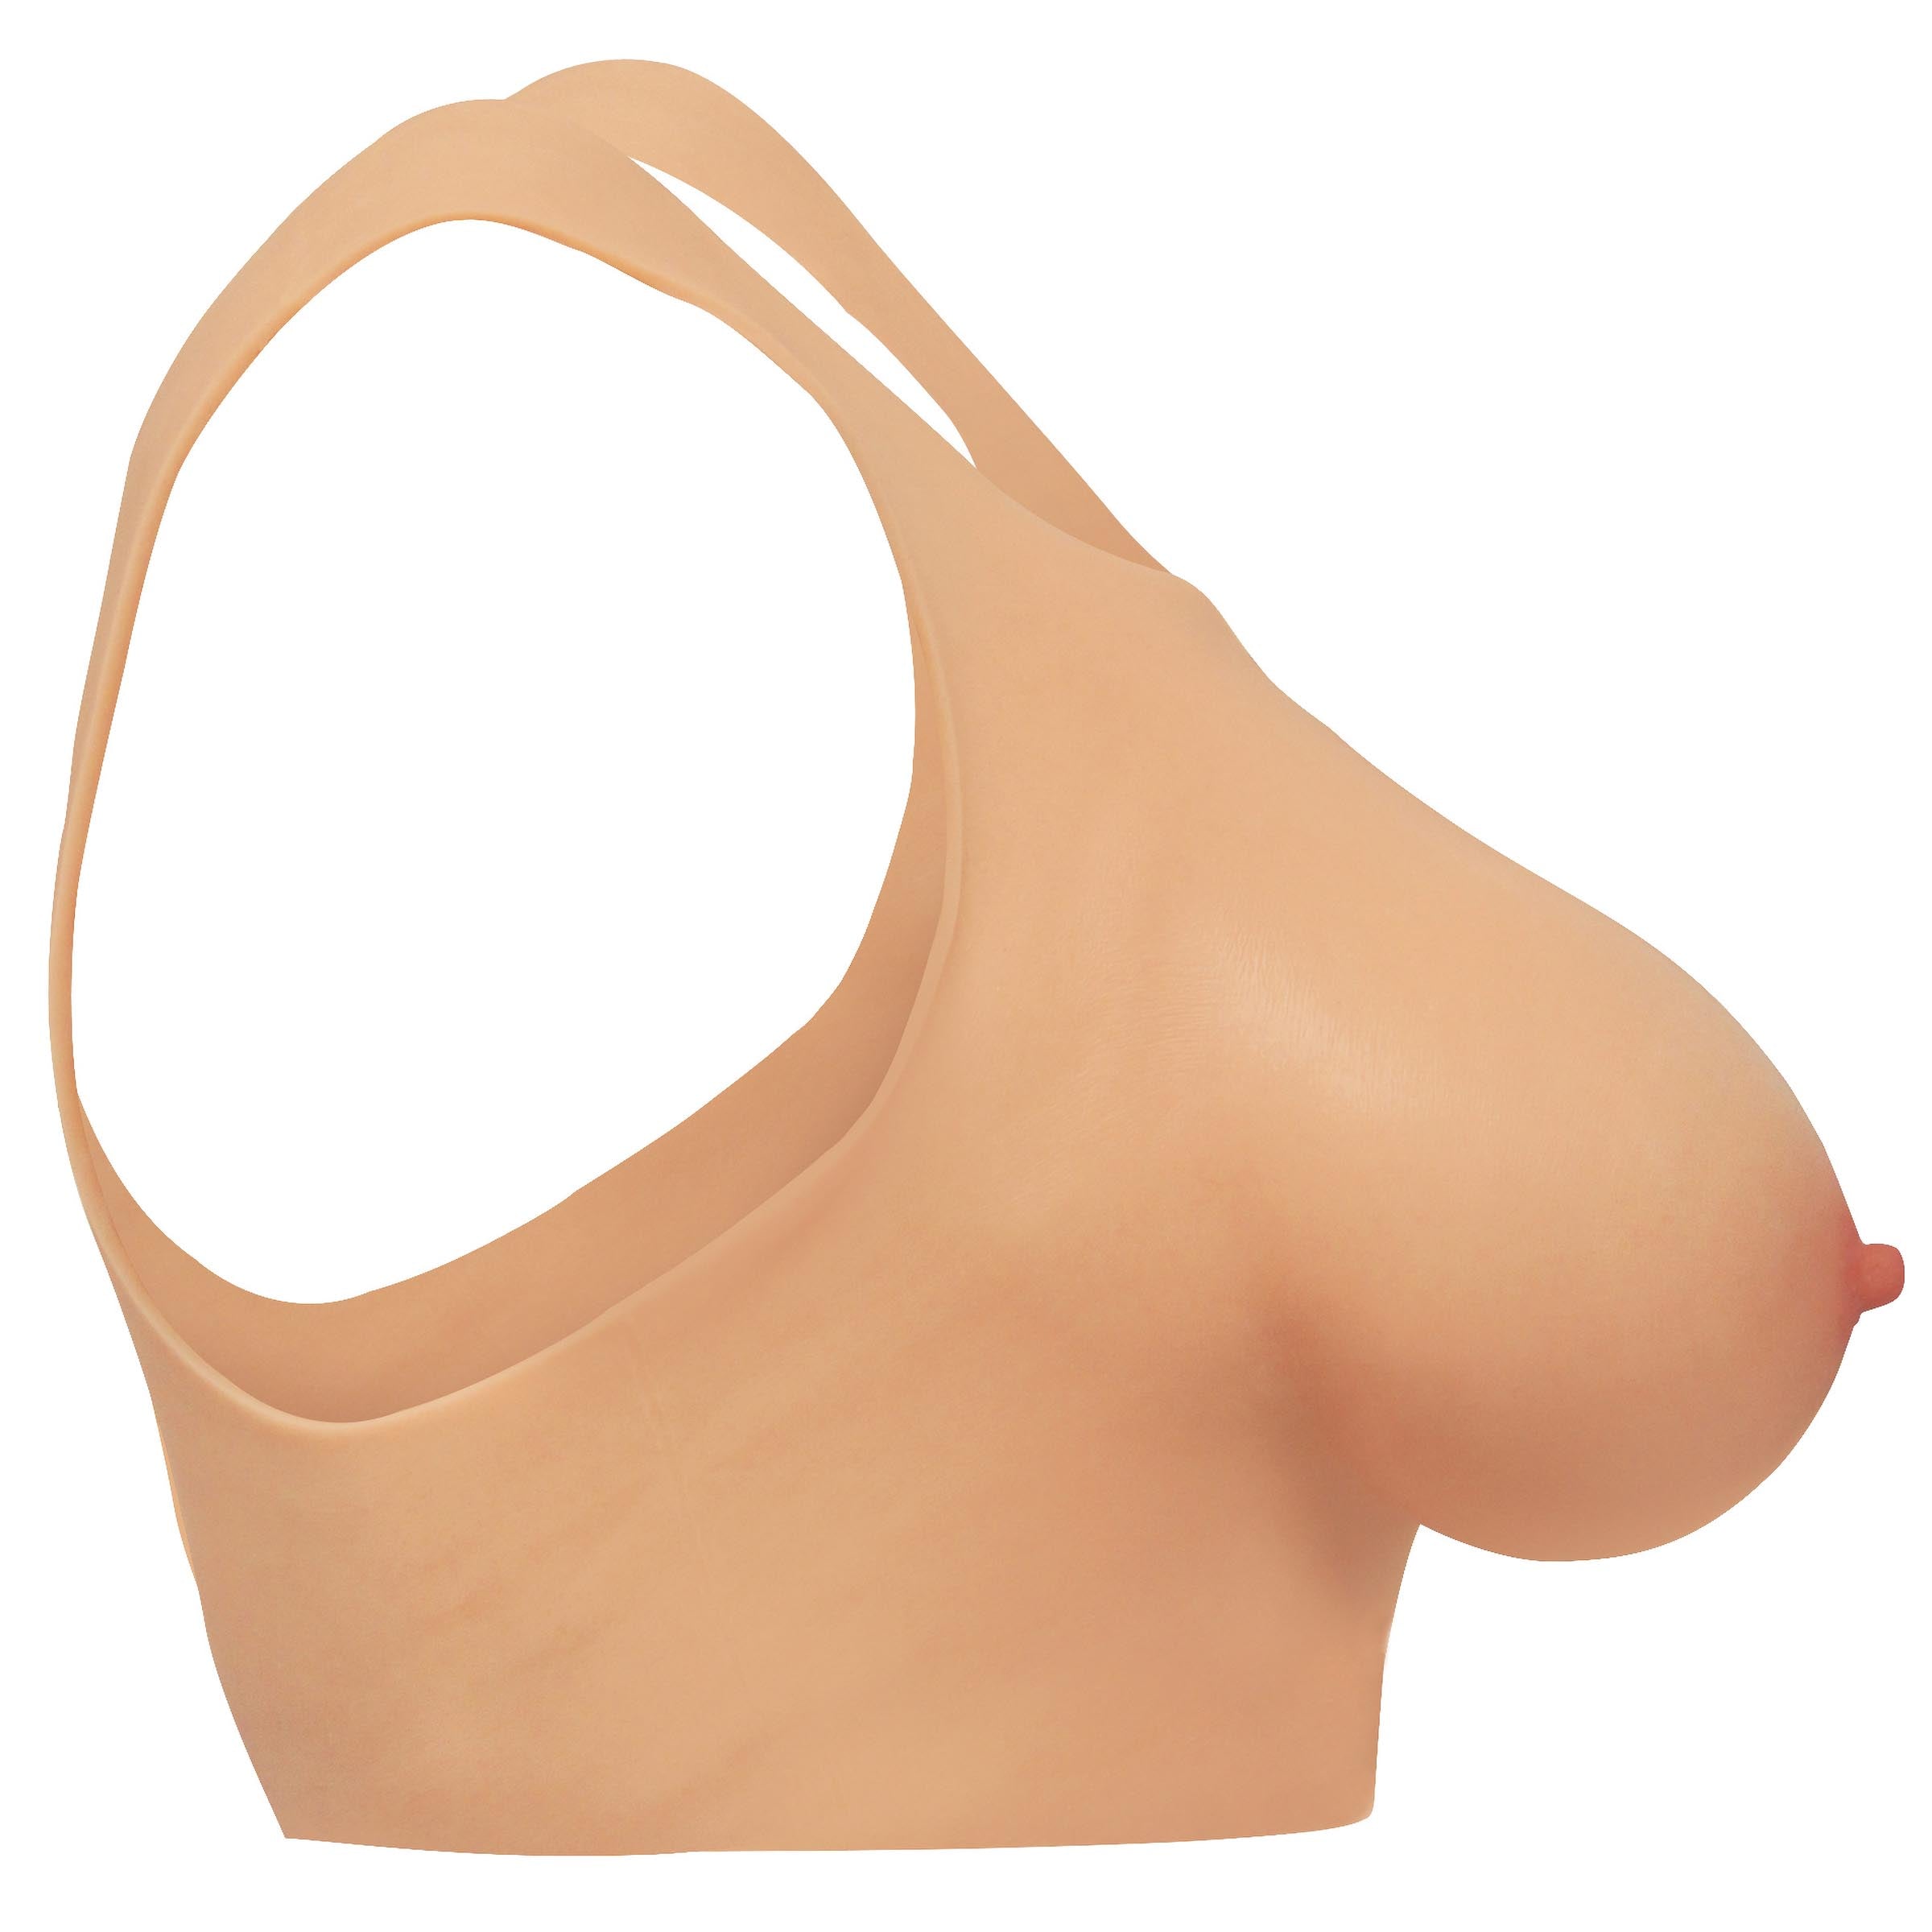 Perky Pair D-Cup Wearable Silicone Breasts